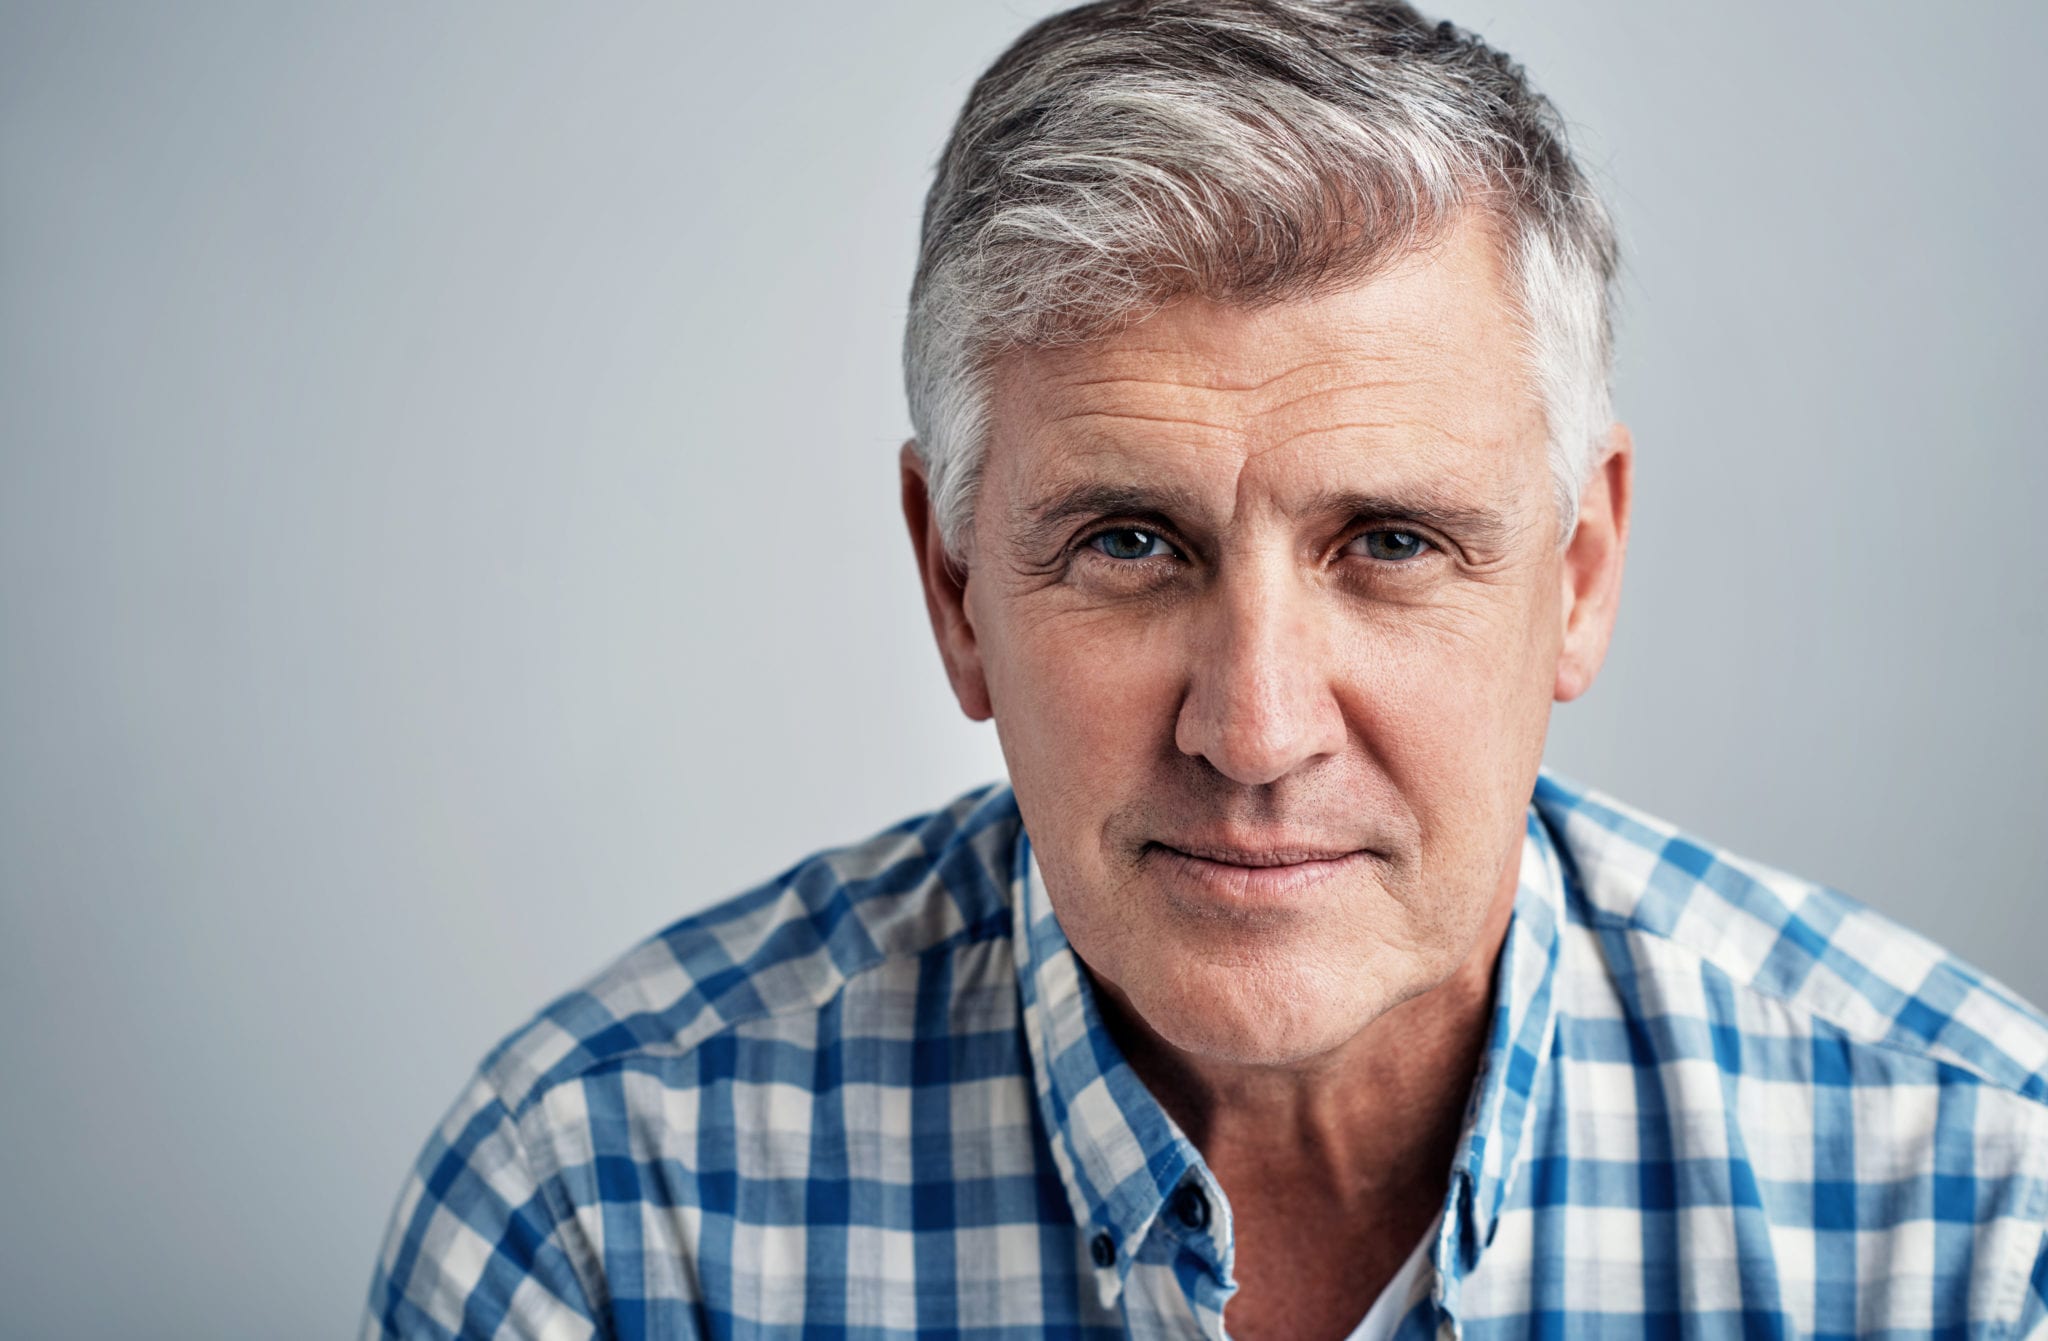 headshot of seated man in plaid shirt with grey hair with a slight smirk on his face, against grey background